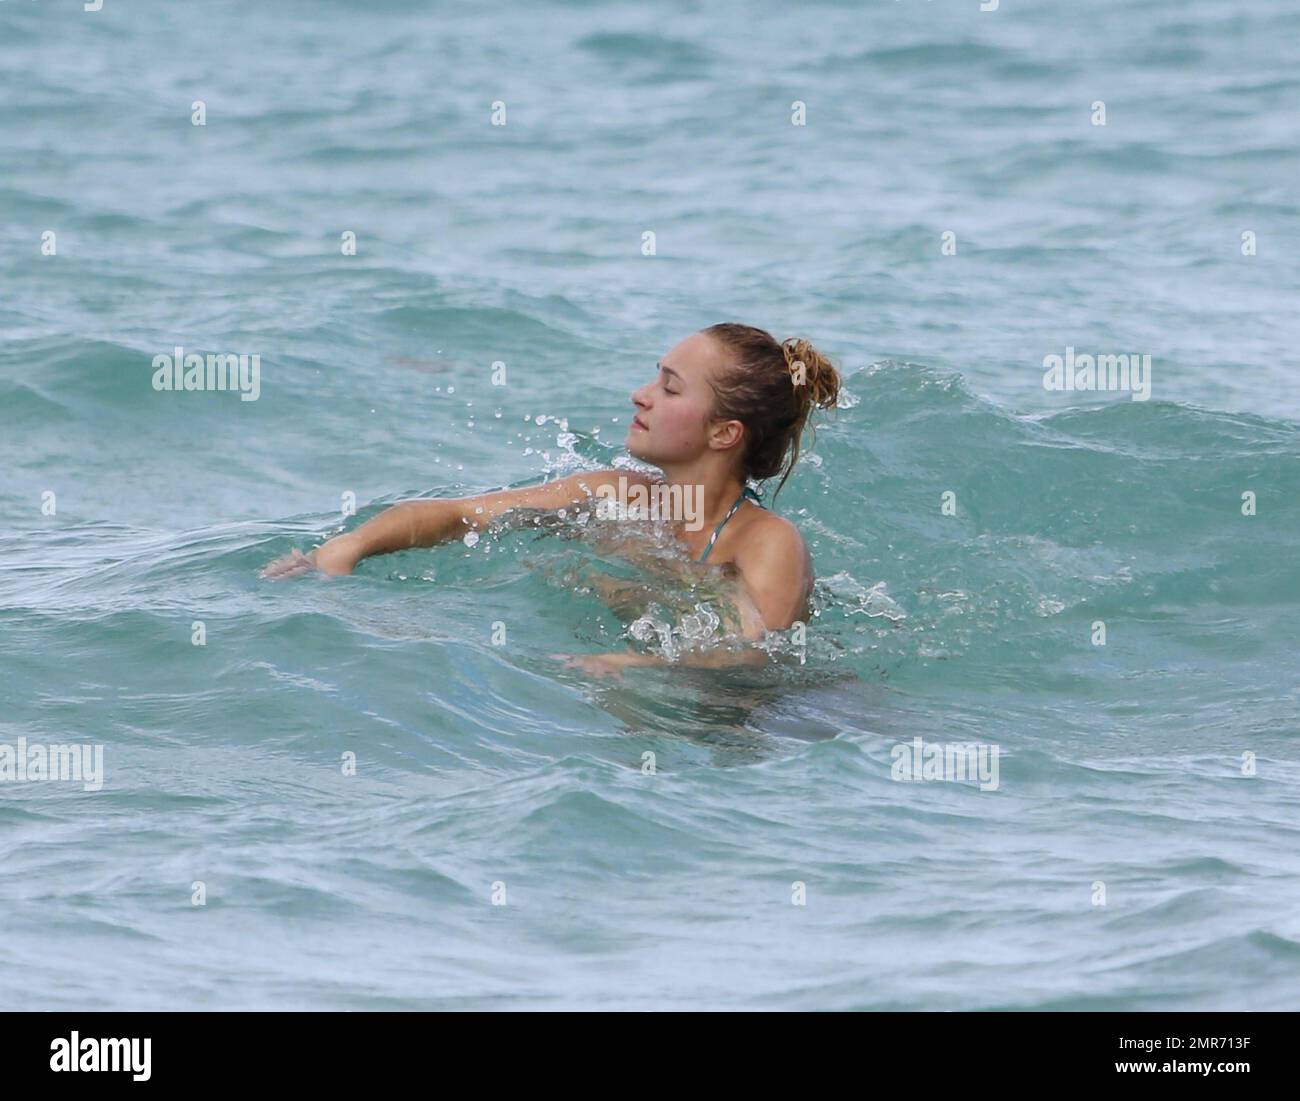 Hayden Panettiere spends Labour Day weekend with friends wearing a colorful bikini and taking a dip in the ocean near her fiancé's beach home. Hayden splashed one over zealous photographer who actually swam up to her in the ocean with his video camera. After drinking a few cocktails and beer, the petite actress swam back along the shore to her condo. Hollywood Beach, FL. 1st September 2013 . Stock Photo